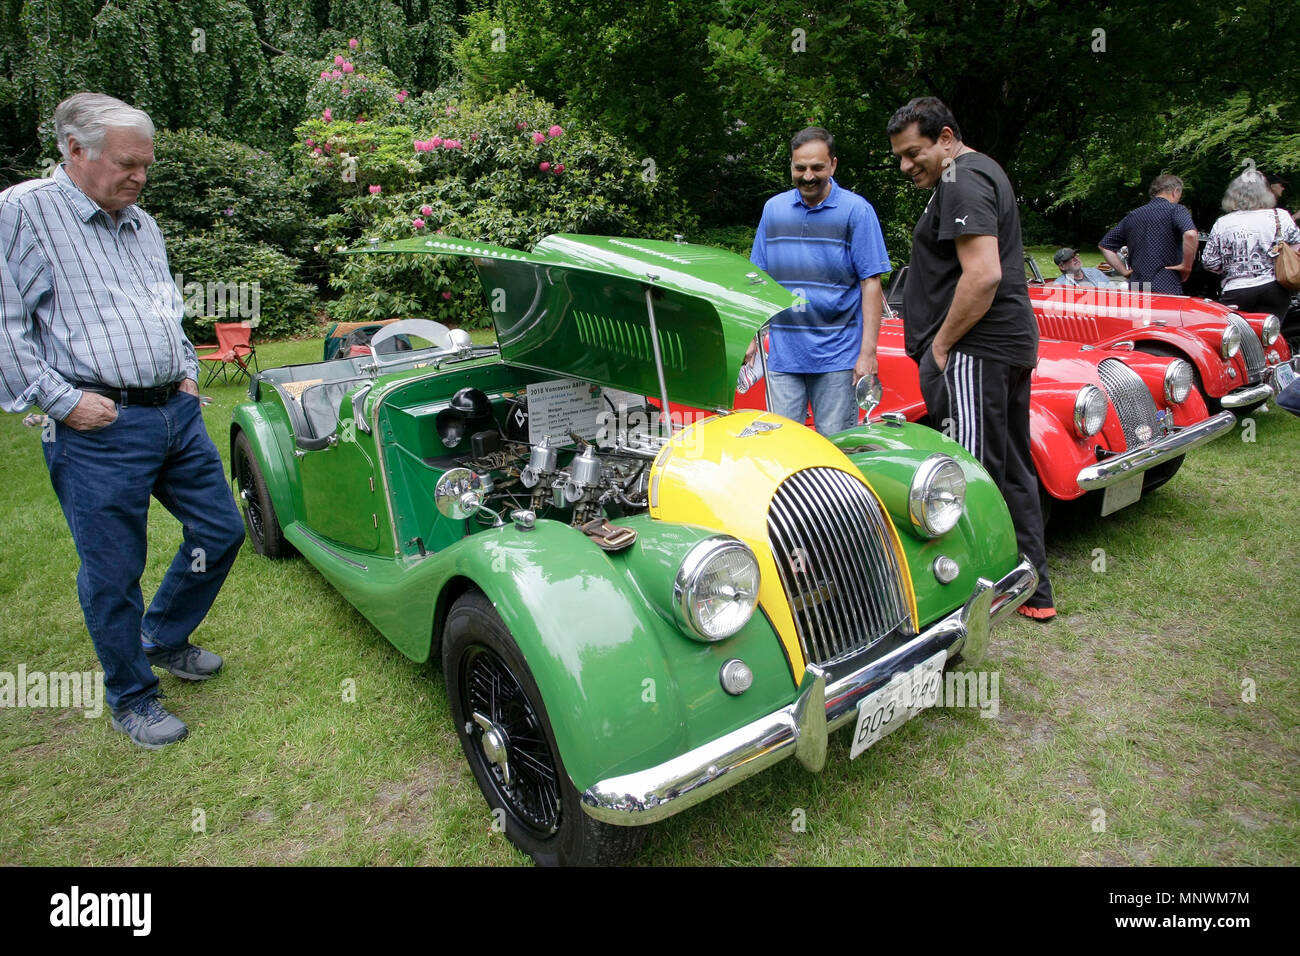 Vancouver, Canada. 19th May, 2018. Visitors admire different British vintage  cars during the 33rd annual All British Field Meet event at Van Dusen  Garden in Vancouver, Canada, May 19, 2018. More than